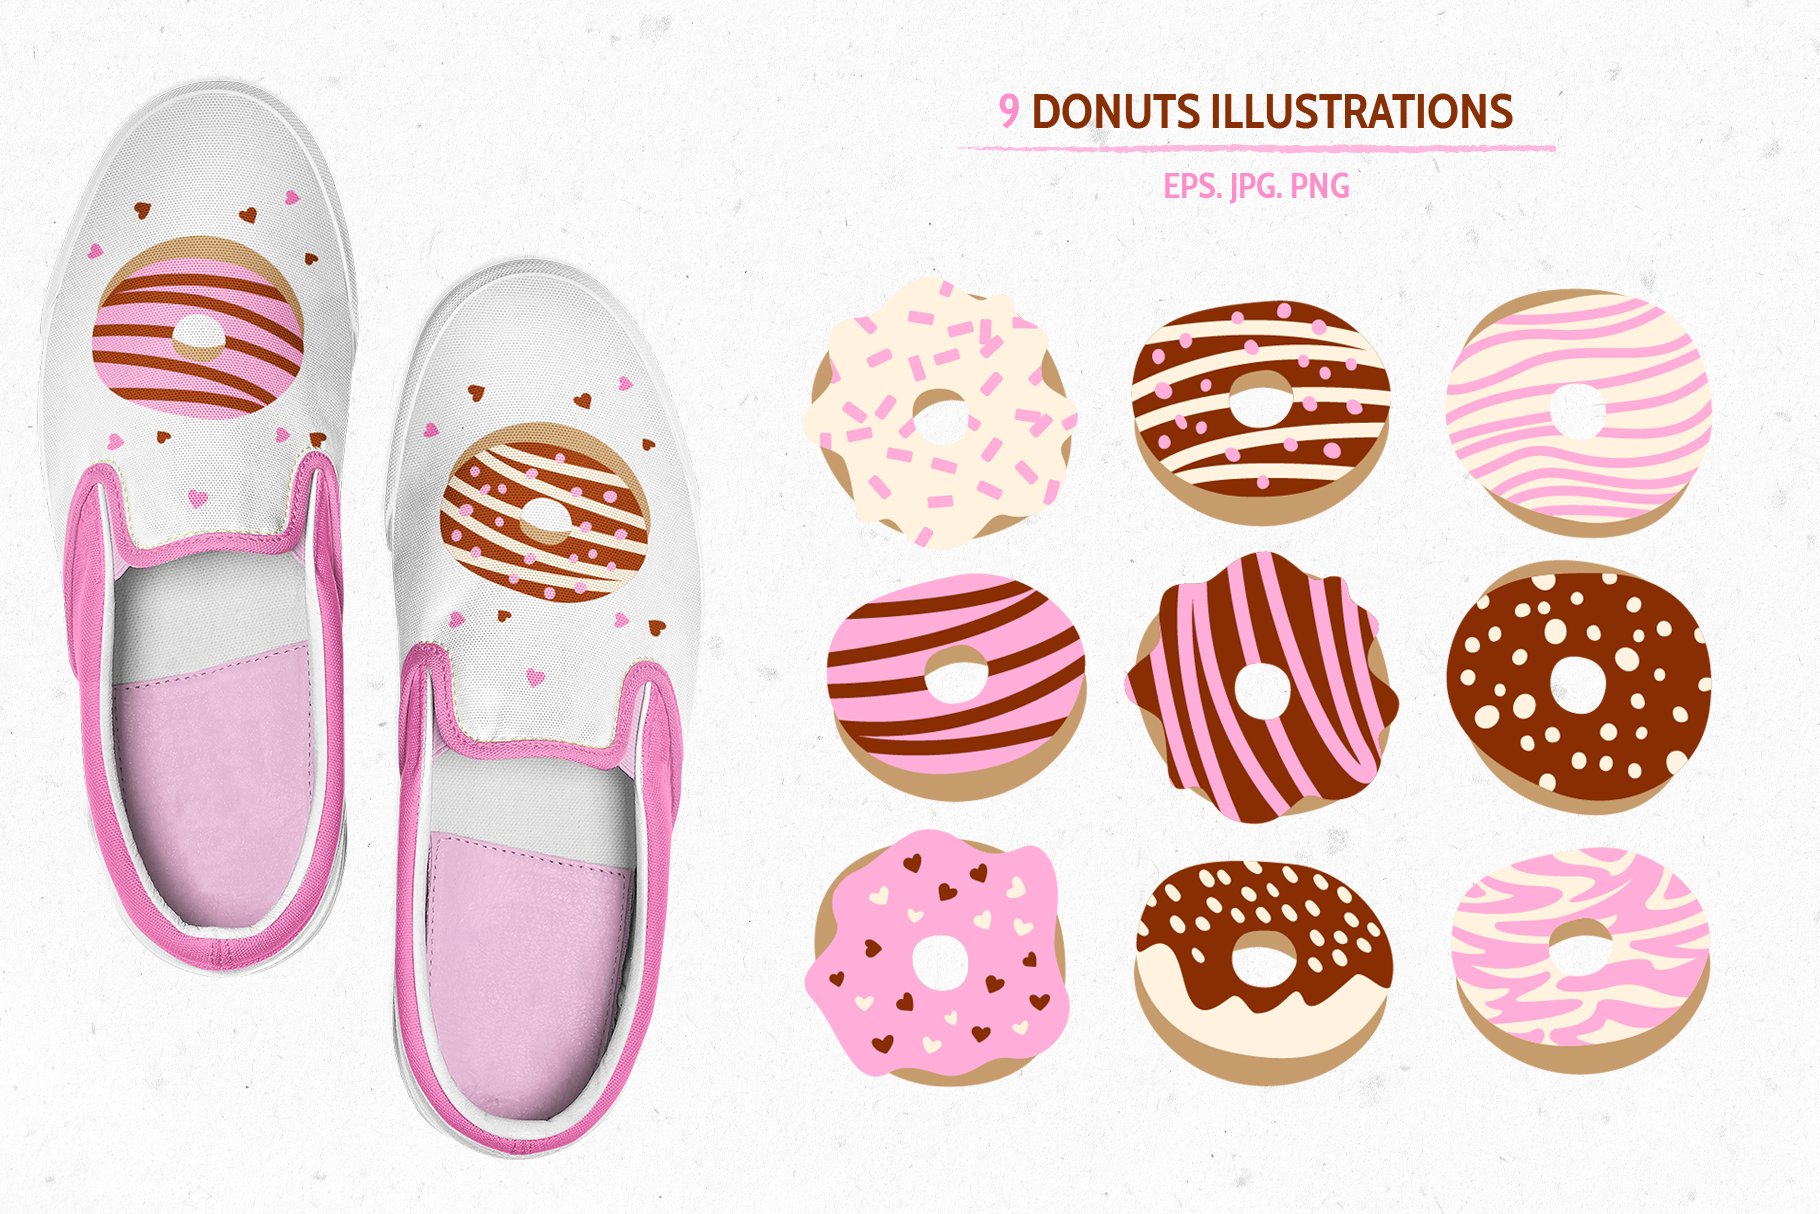 So colorful donuts with interesting prints.